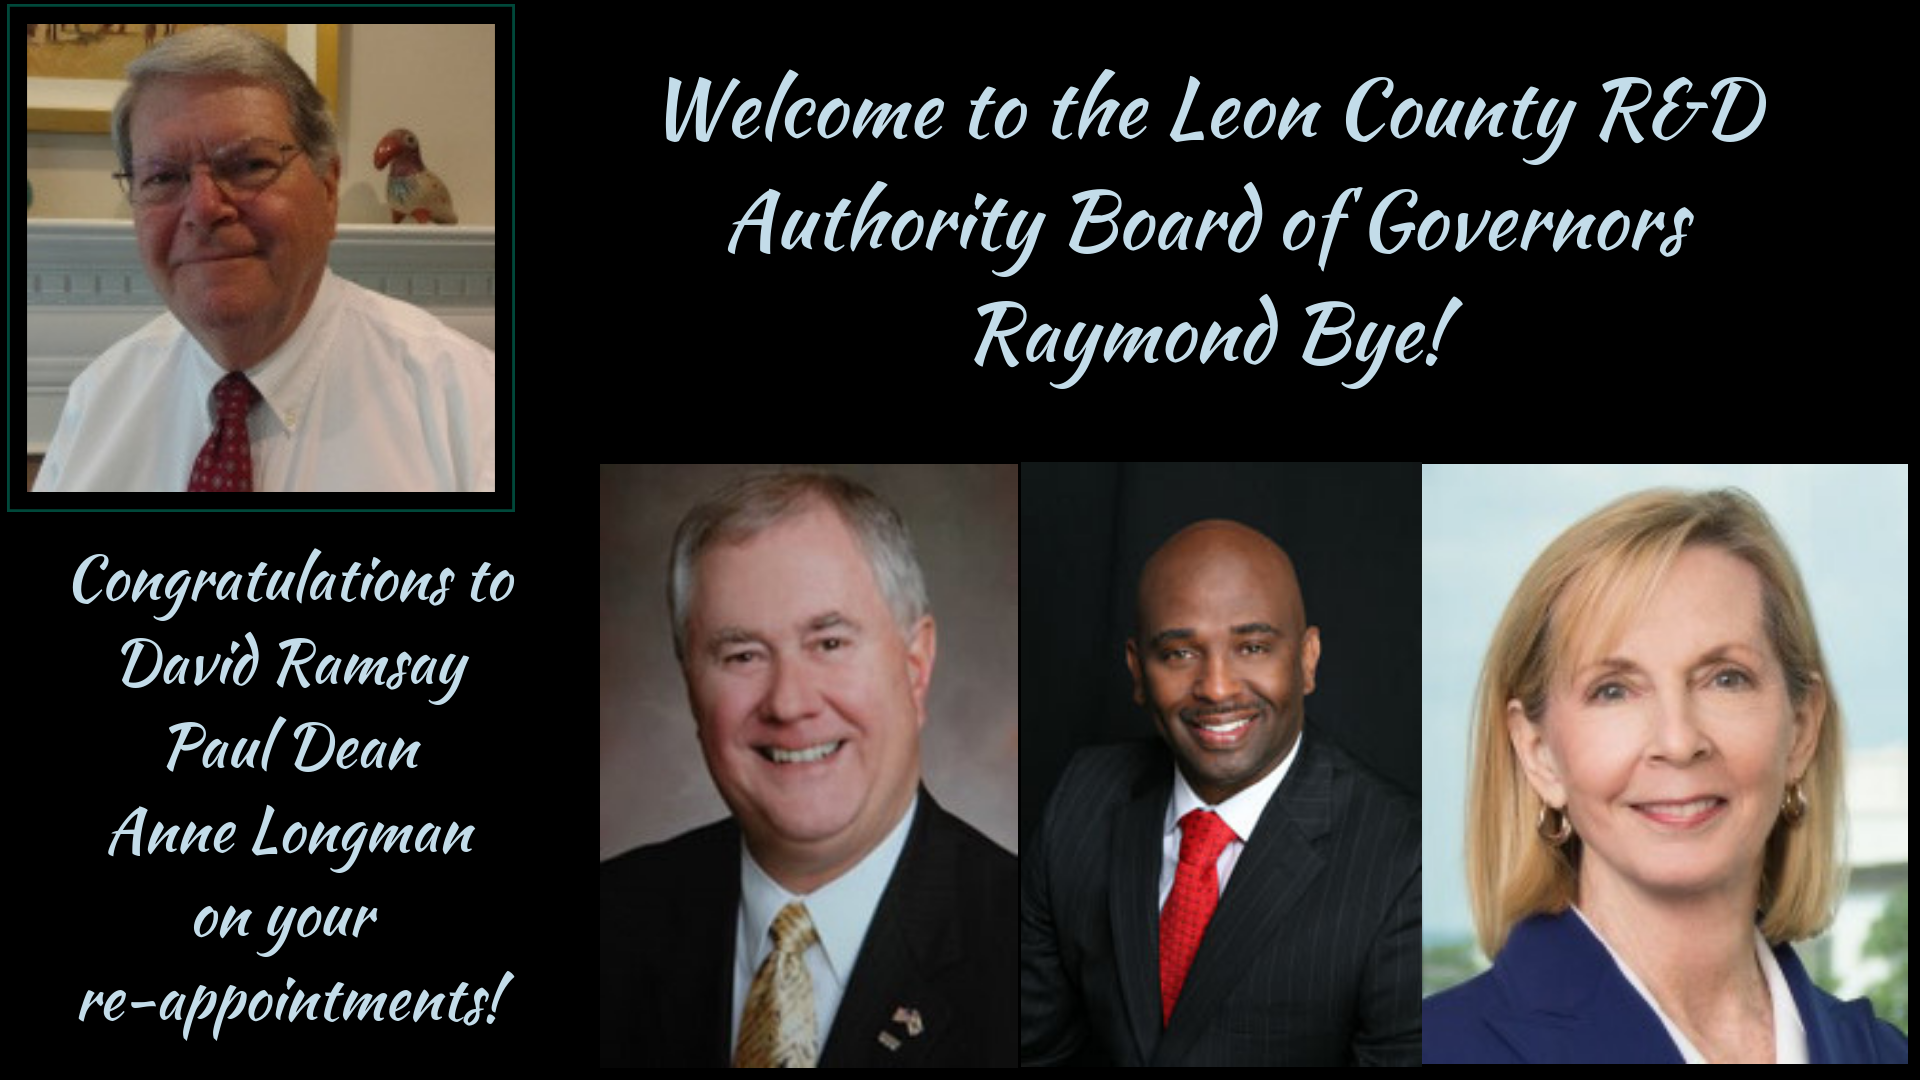 2018 Leon County R&D Authority Board of Governors